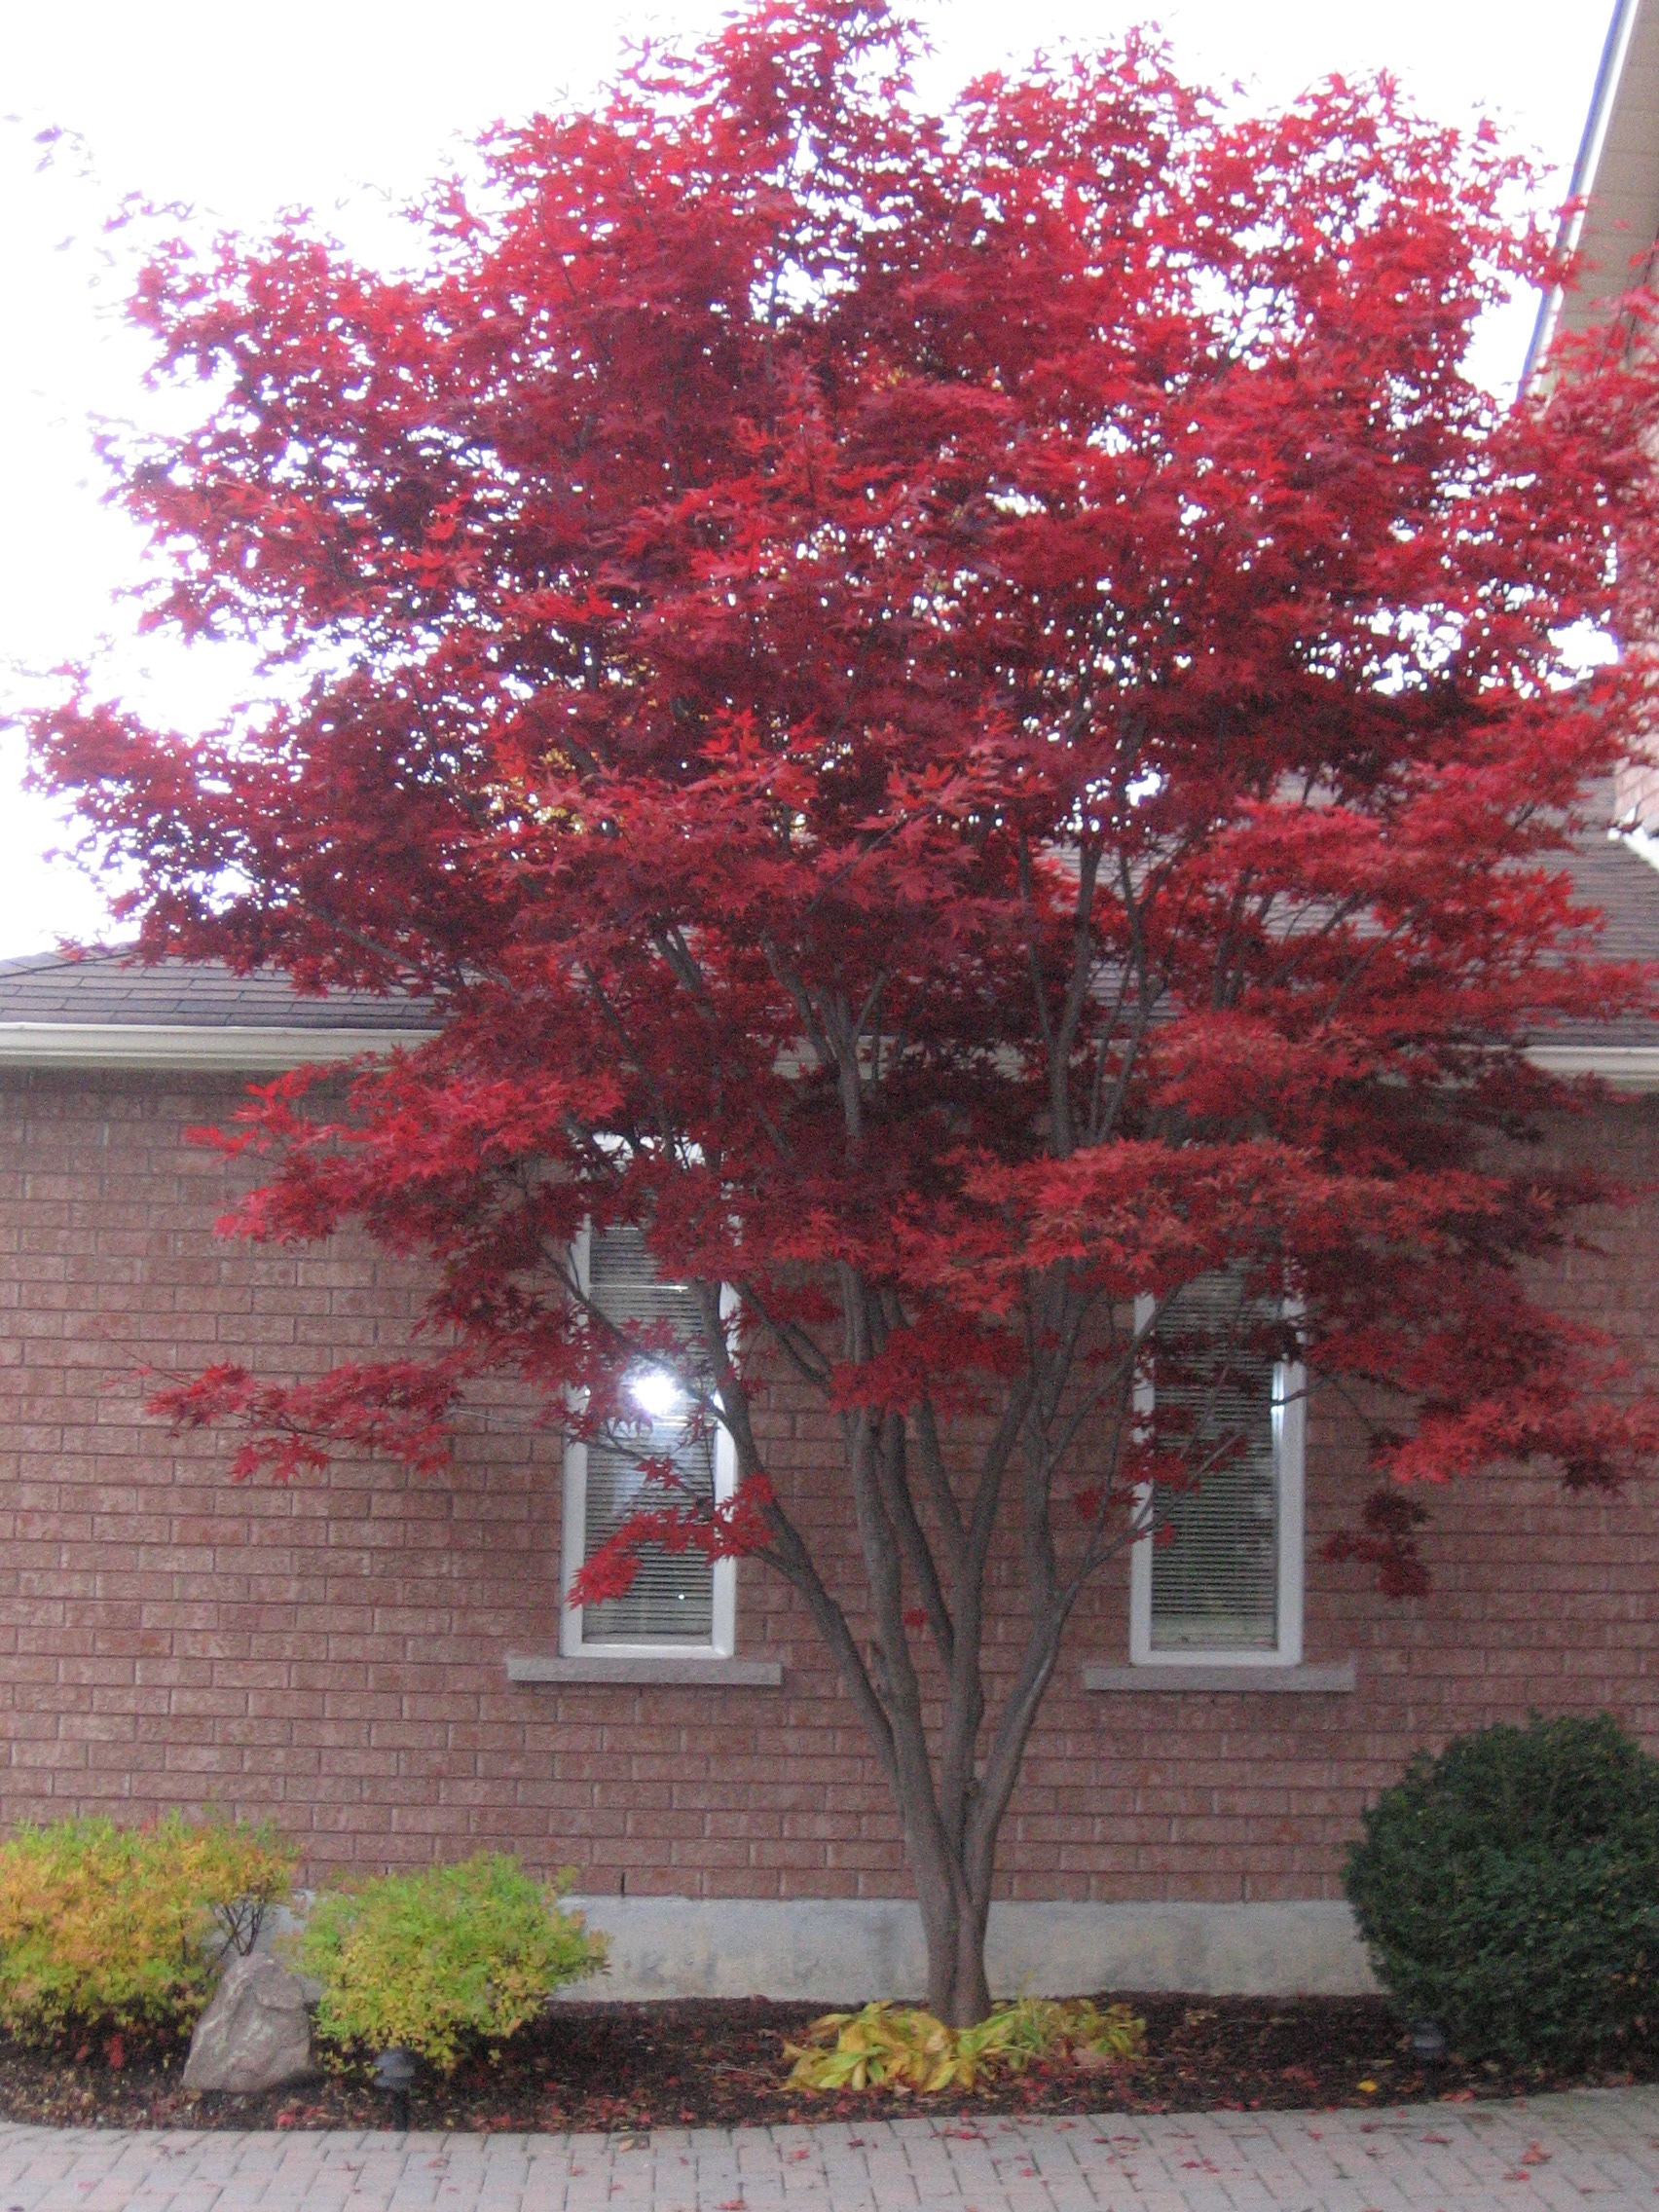 Mighty Japanese Maple in my yard